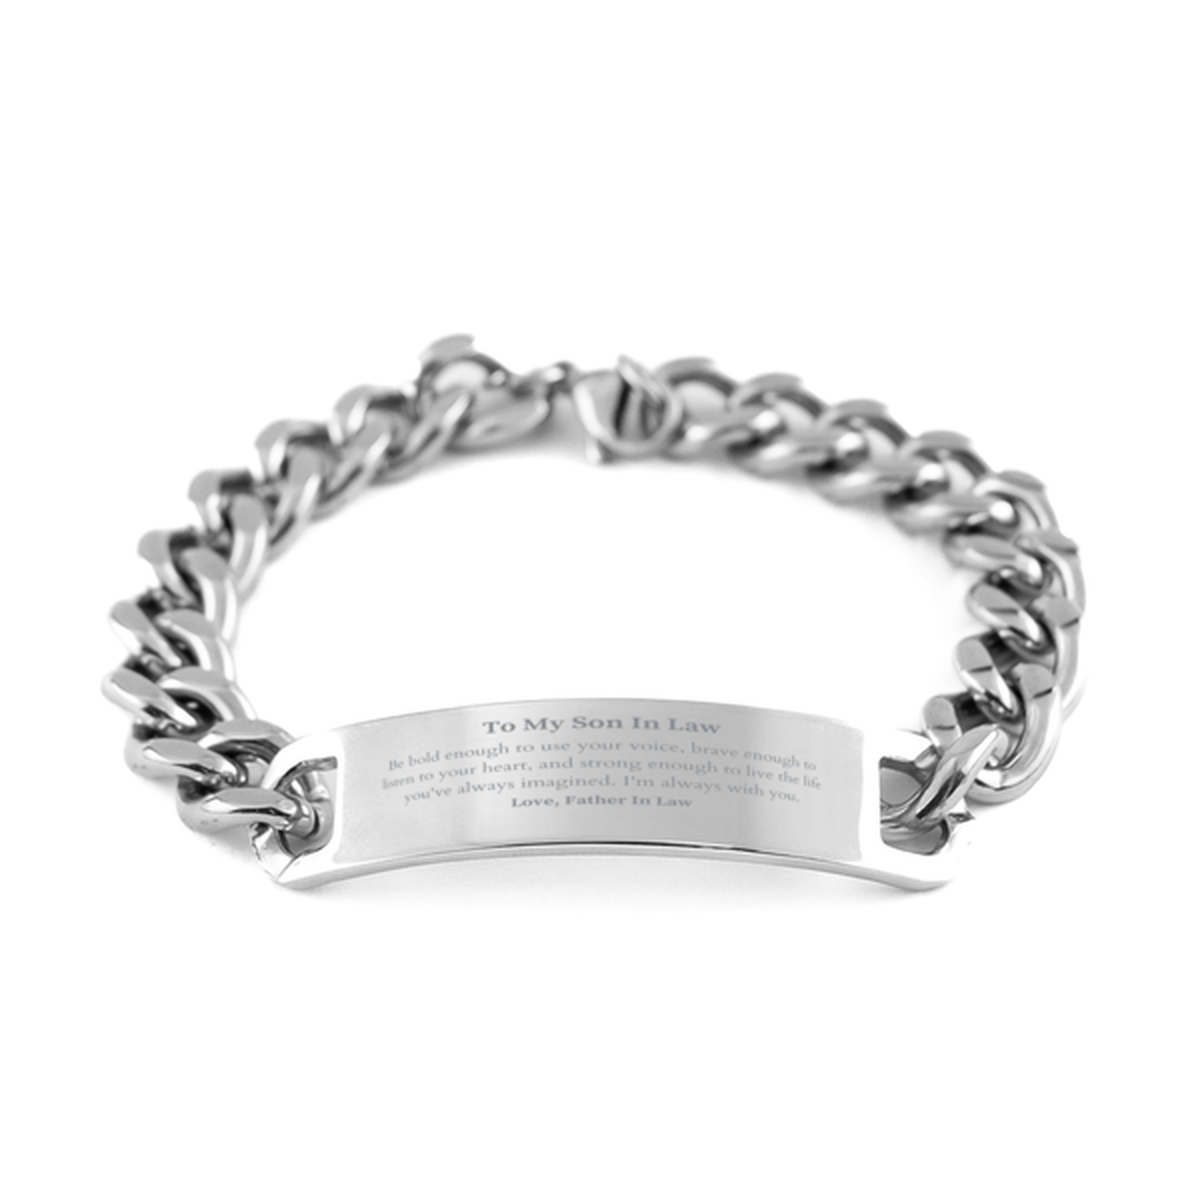 Keepsake Son In Law Cuban Chain Stainless Steel Bracelet Gift Idea Graduation Christmas Birthday Son In Law from Father In Law, Son In Law Be bold enough to use your voice, brave enough to listen to your heart. Love, Father In Law